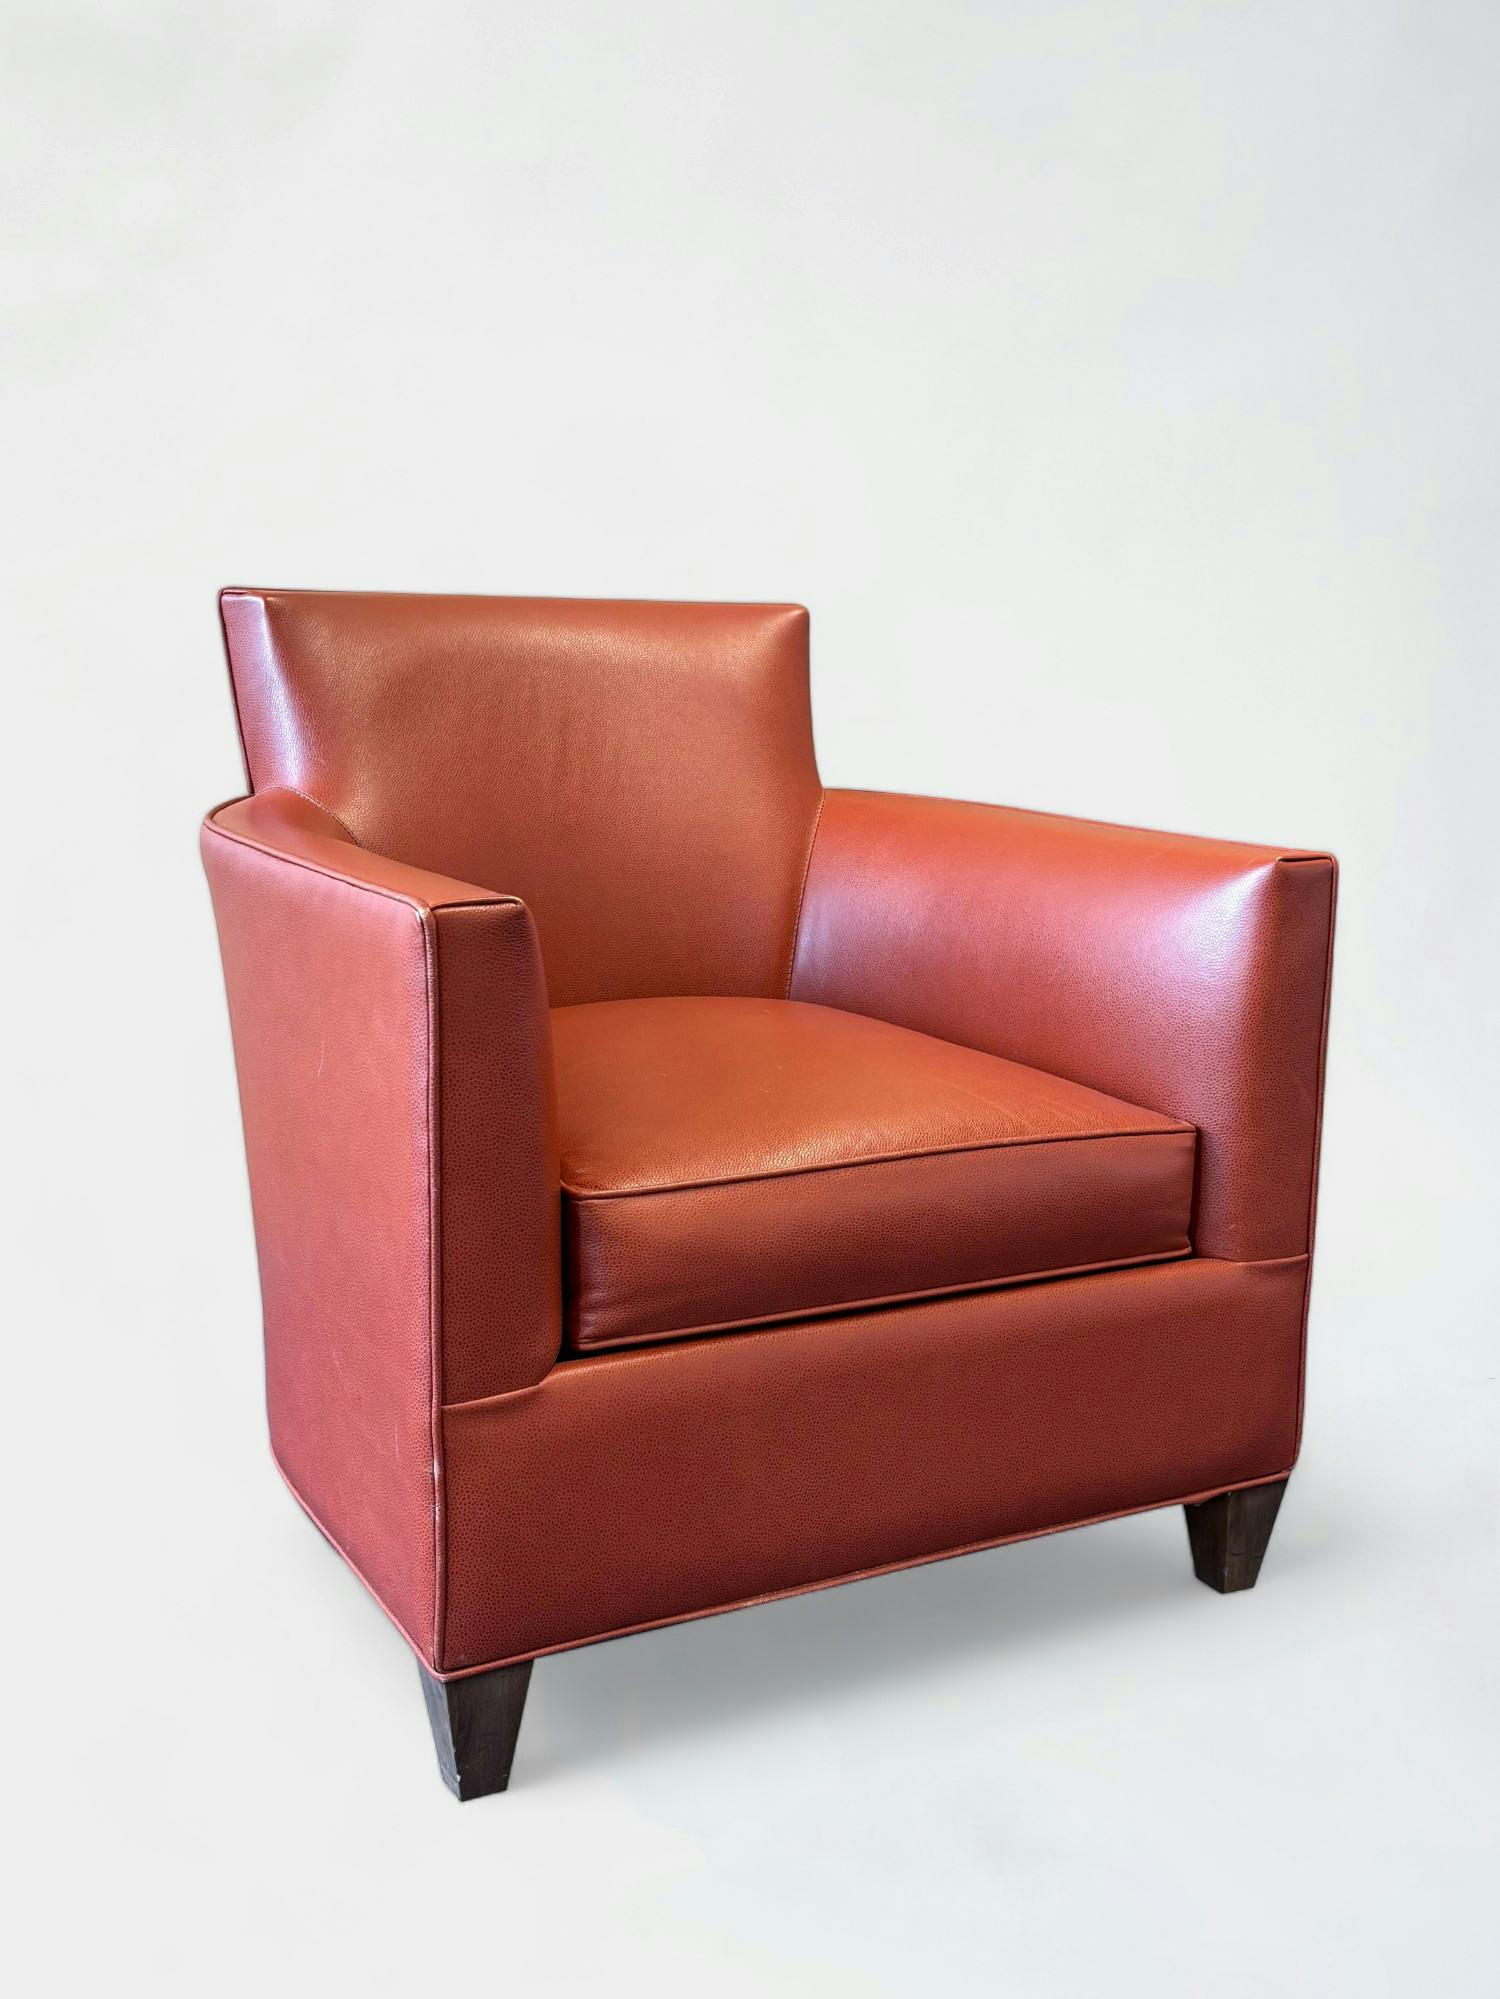 Burnt Orange Faux Leather Armchair with Modern Design - Relieve Furniture